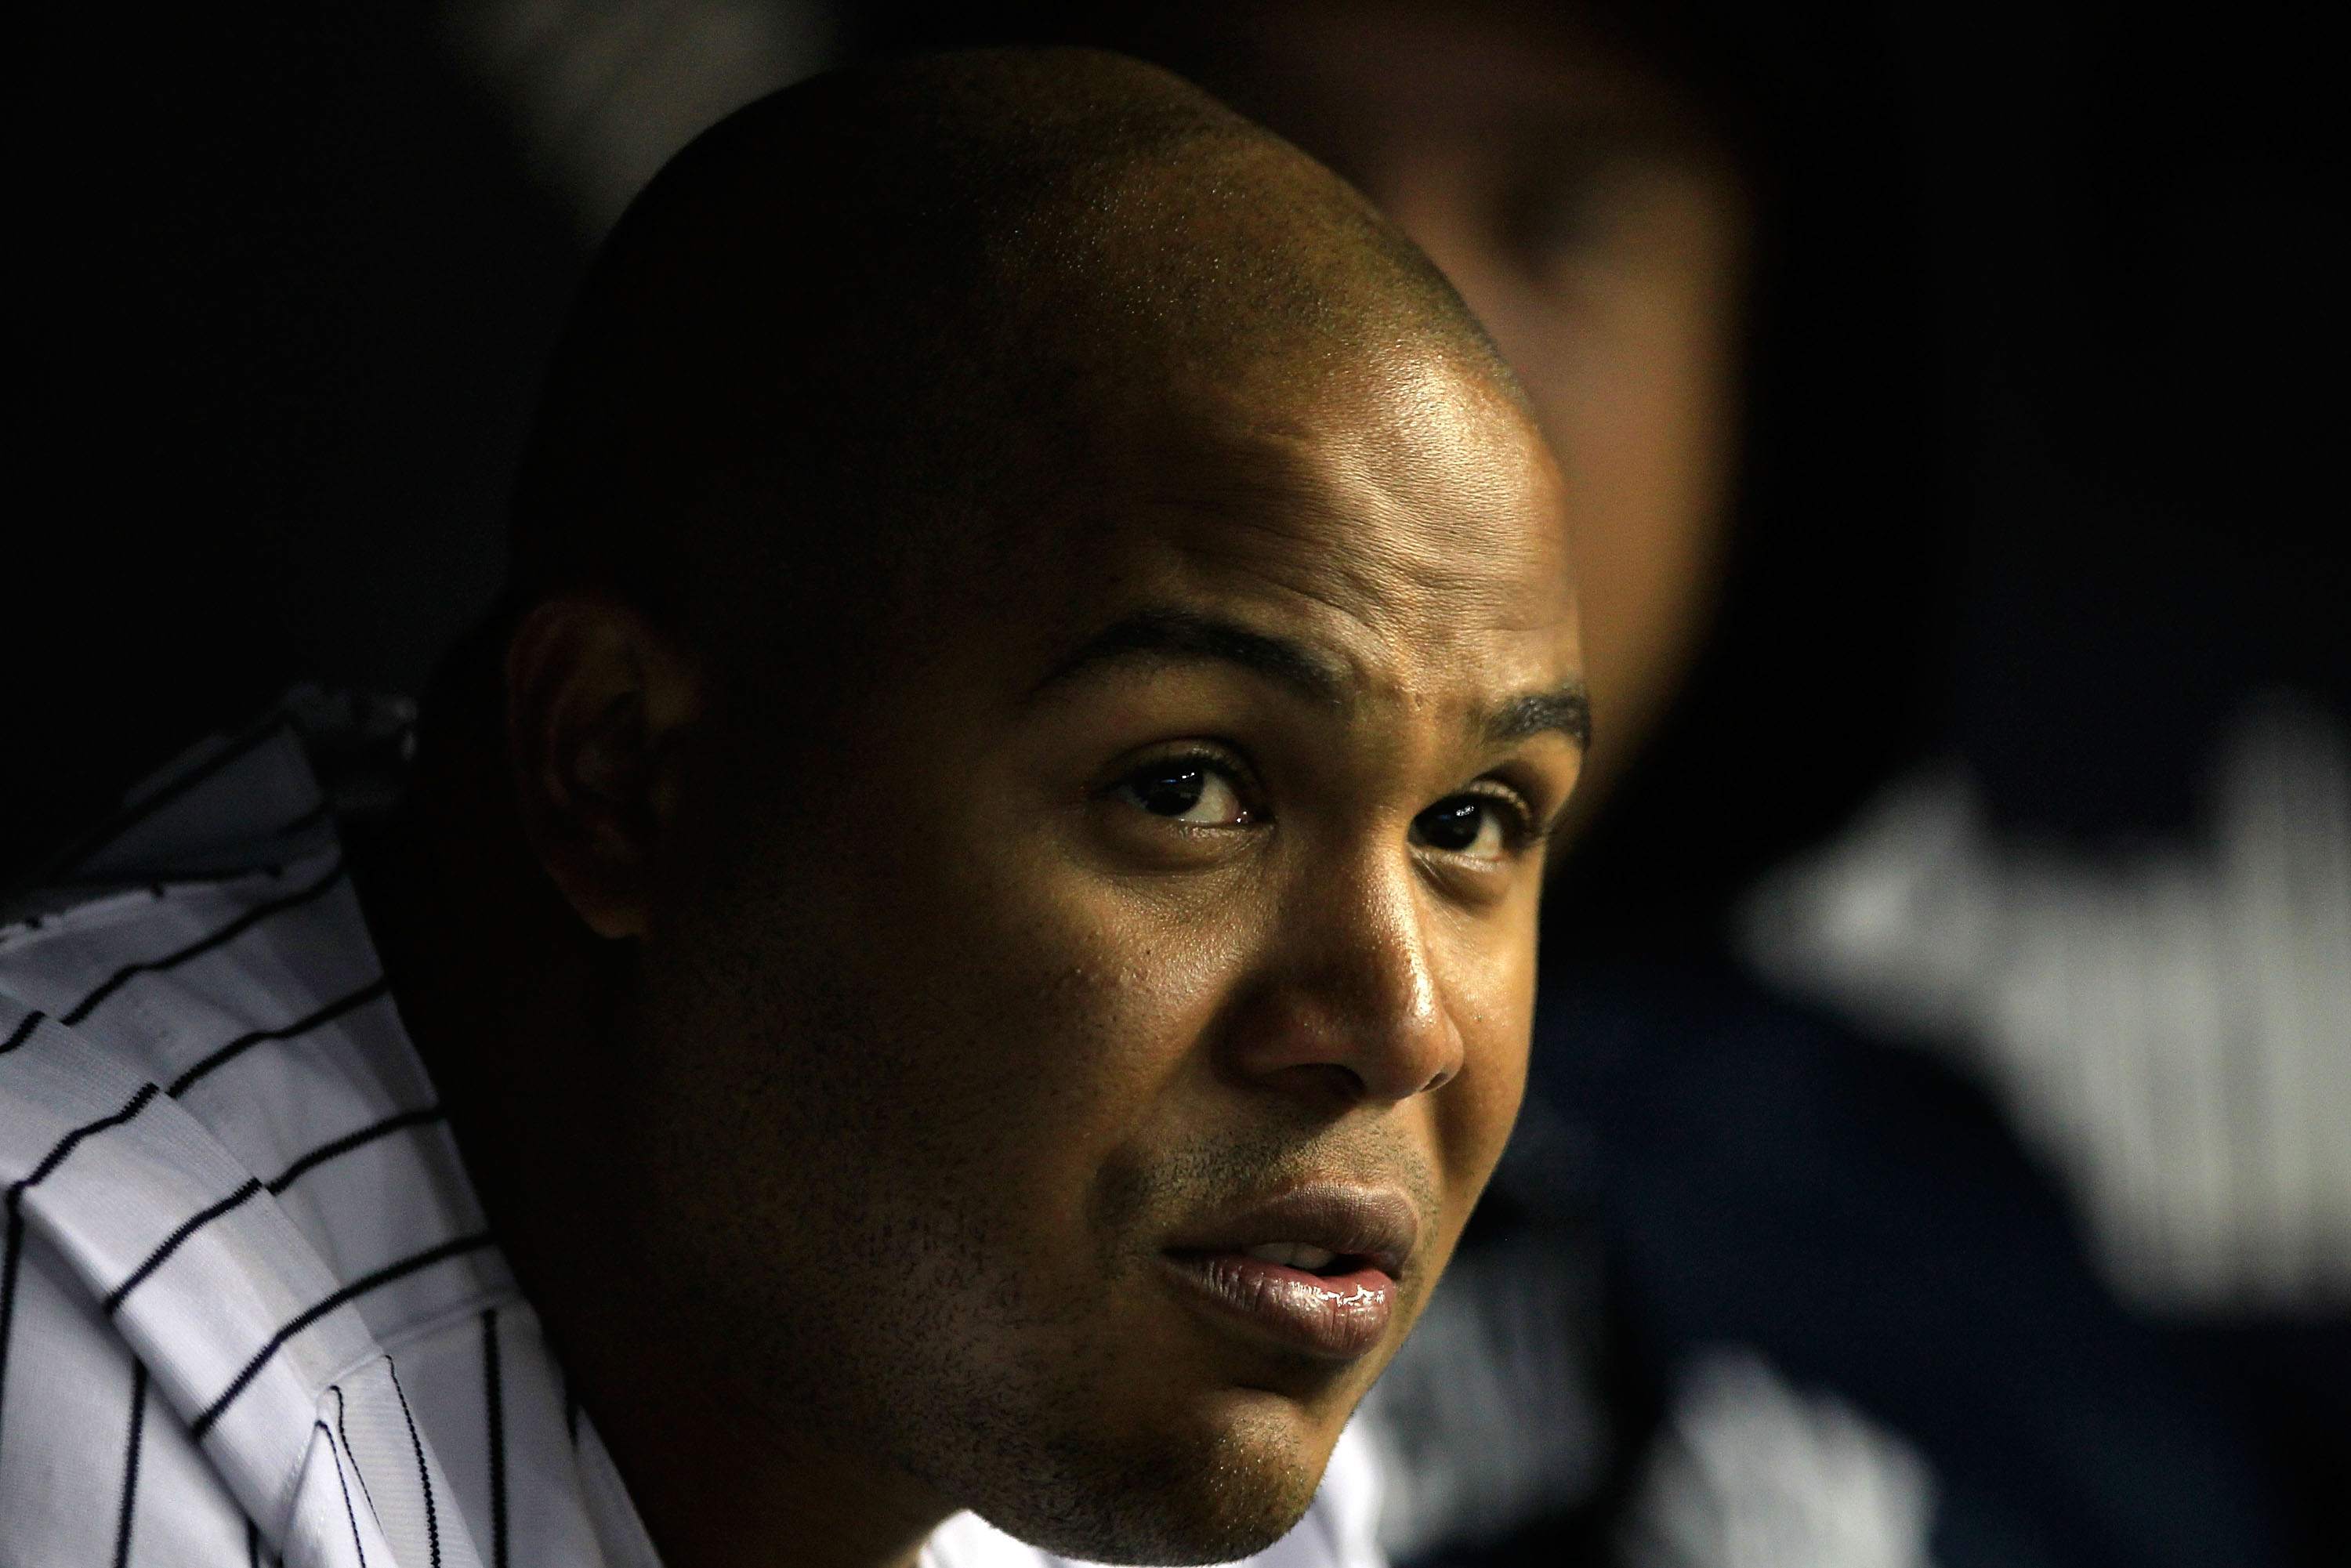 NEW YORK, NY - APRIL 15: Andruw Jones of the New York Yankees looks on from the dugout during the game against the Texas Rangers at Yankee Stadium on April 15, 2011 in the Bronx borough of New York City.  (Photo by Chris Trotman/Getty Images)